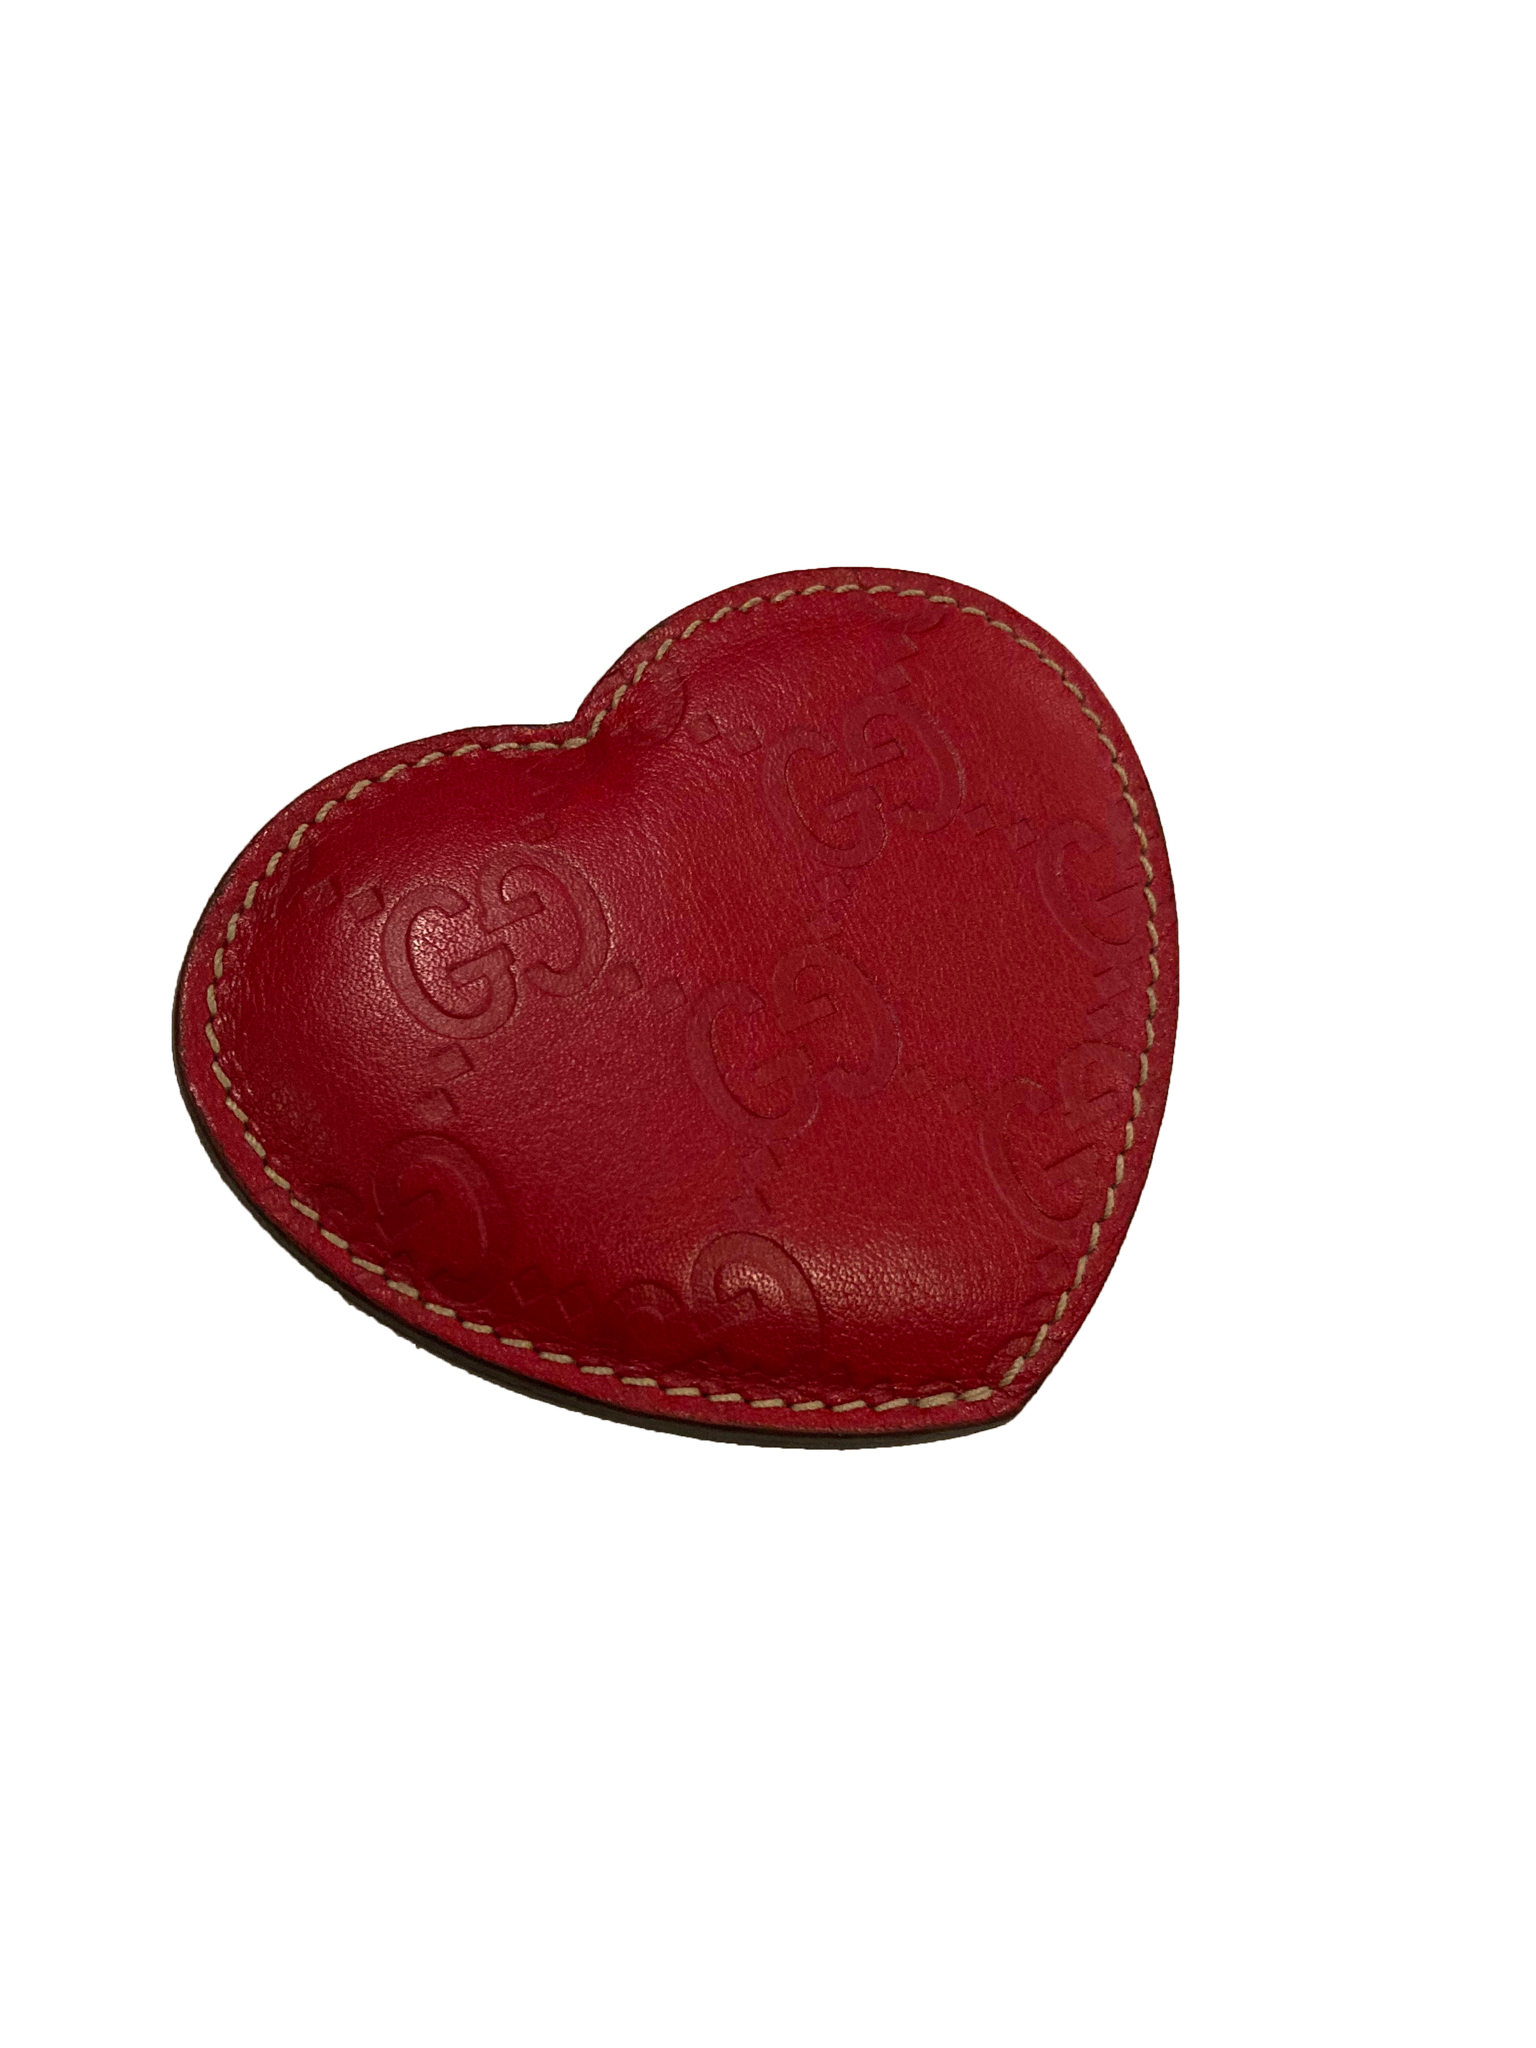 Heart Mirror with Leather Pouch